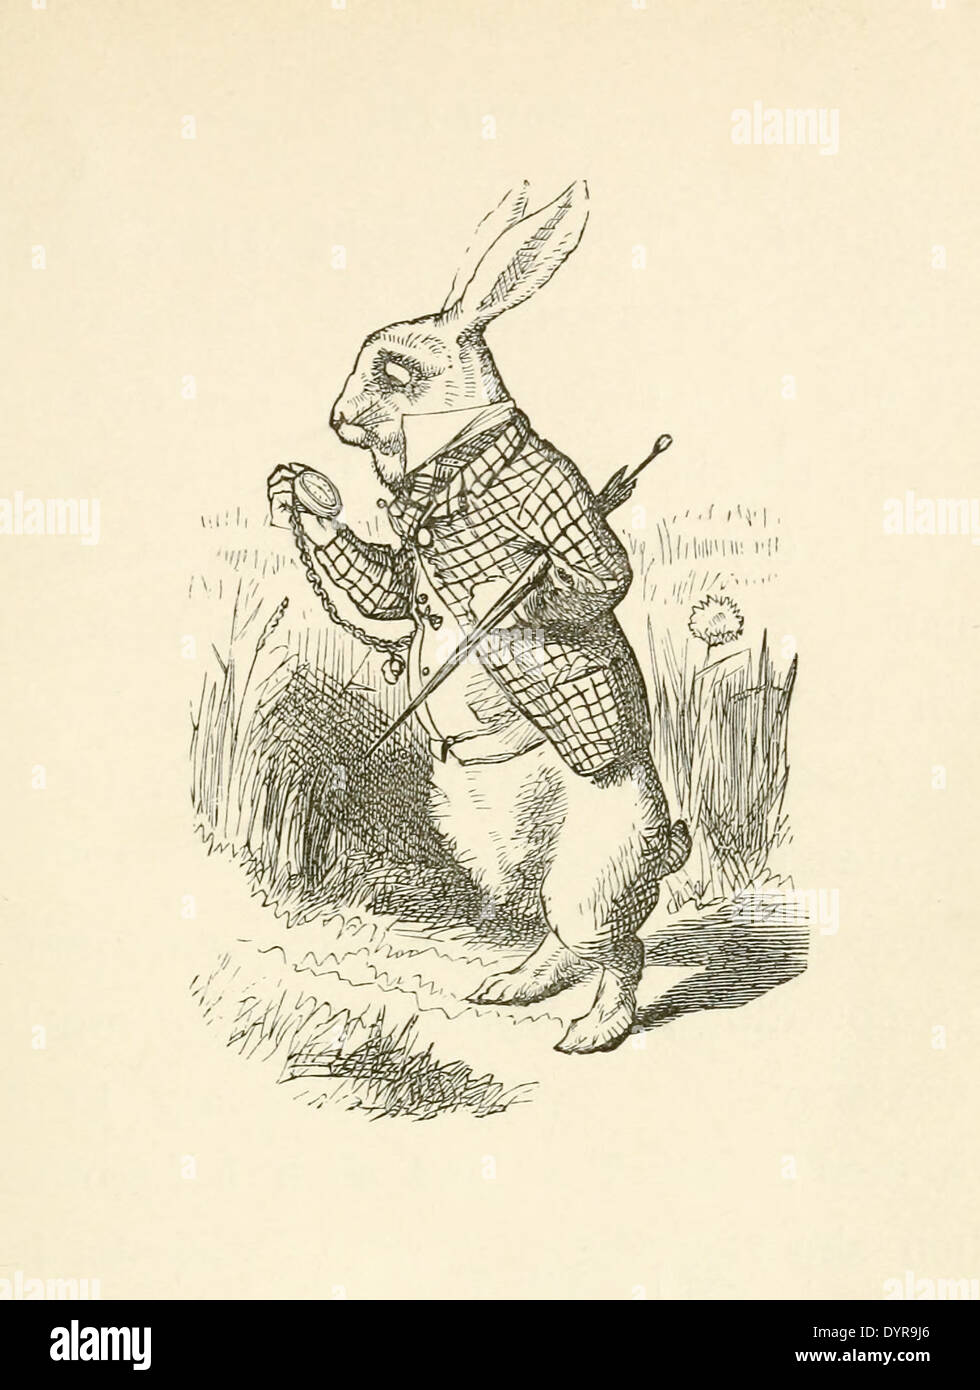 Sir John Tenniel  (1820-1914) illustration from 'Alice in Wonderland' by Lewis Carroll first published in 1865. The White Rabbit Stock Photo